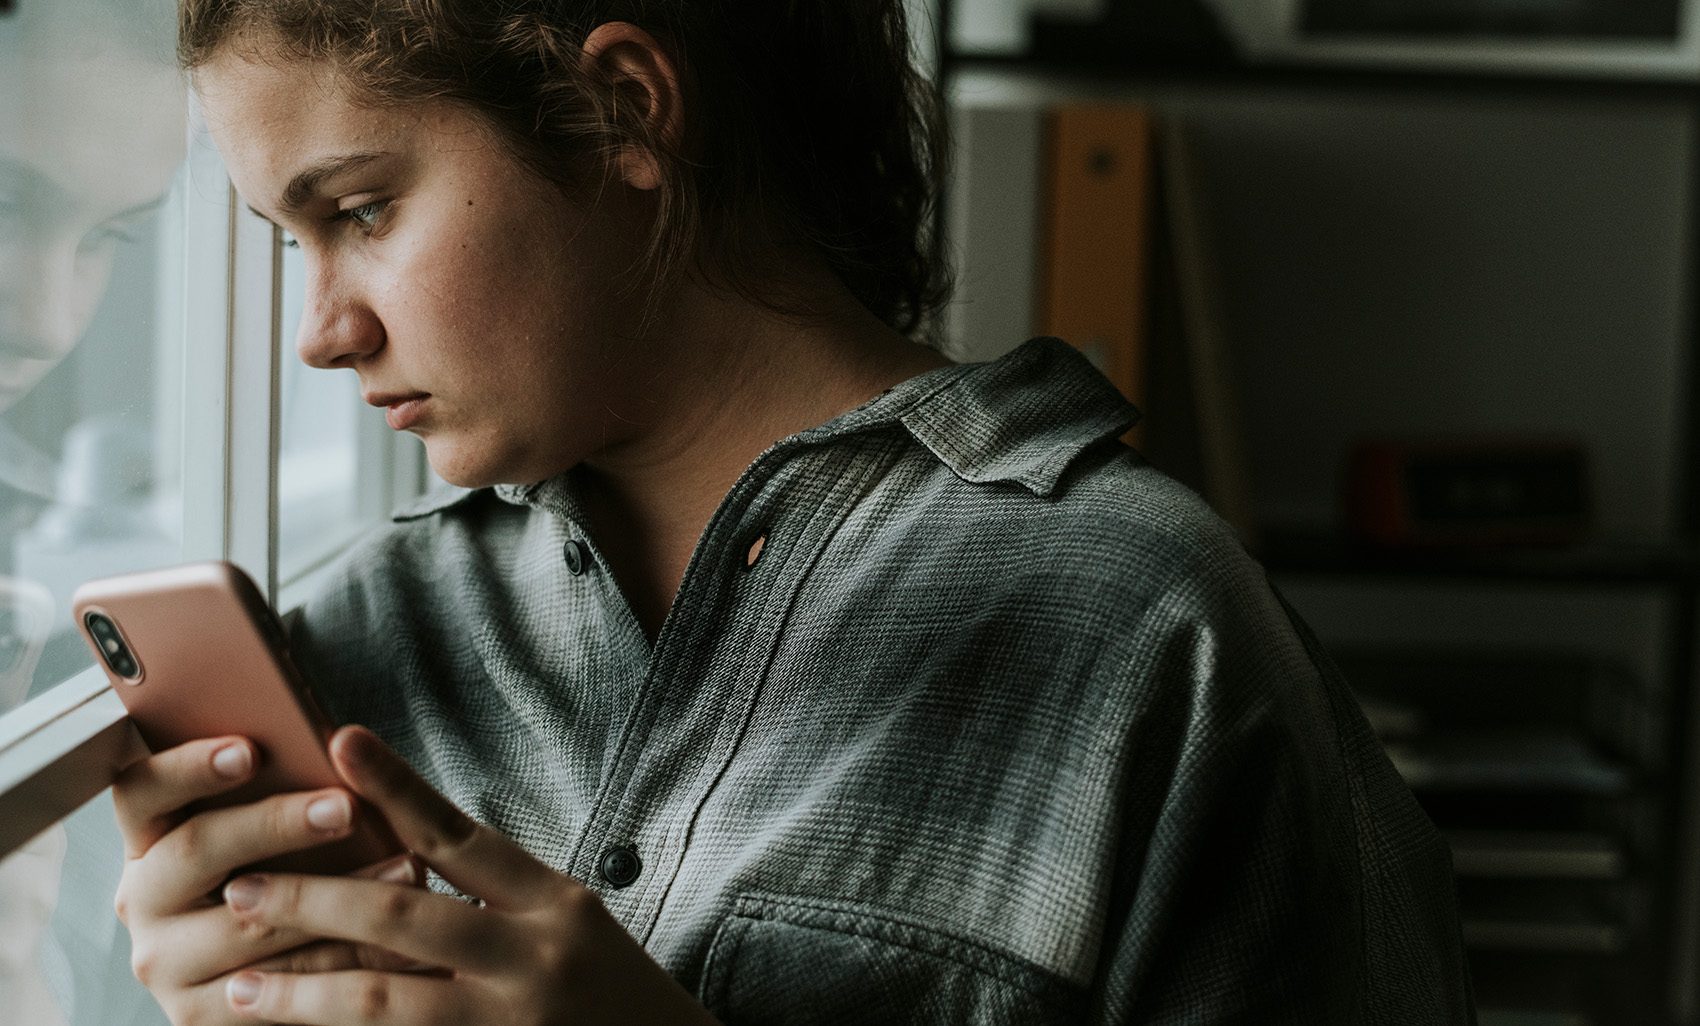 Cyberbullying Linked to Eating Disorder Symptoms